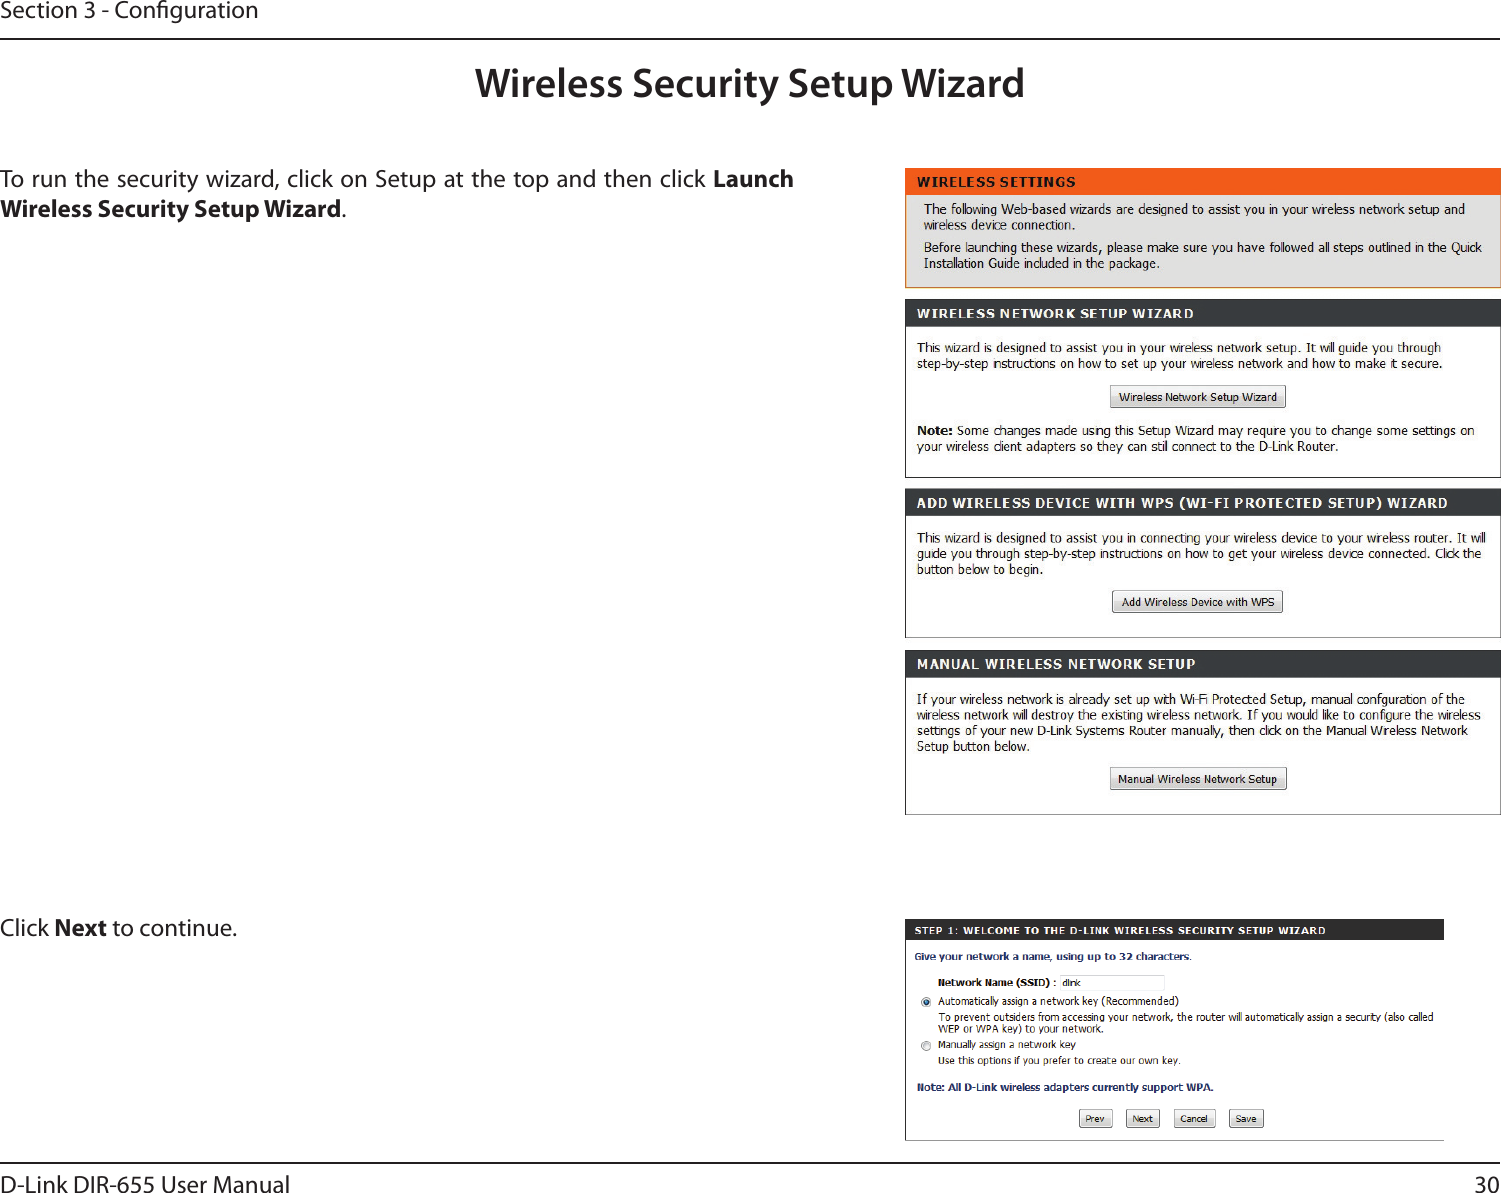 30D-Link DIR-655 User ManualSection 3 - CongurationWireless Security Setup WizardTo run the security wizard, click on Setup at the top and then click Launch Wireless Security Setup Wizard.Click Next to continue.